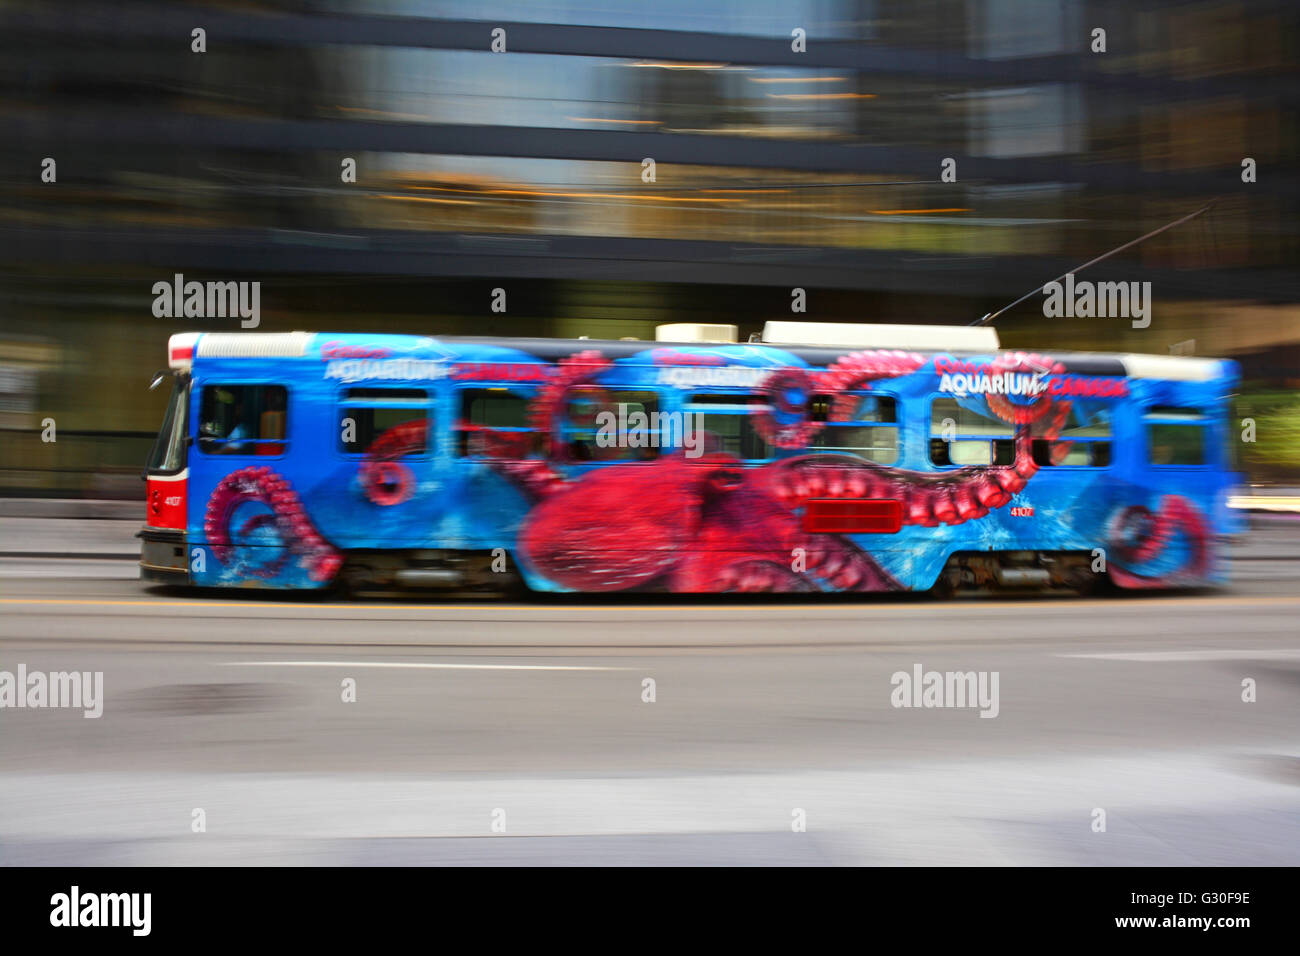 Painted streetcar in blurred motion, Toronto, Canada Stock Photo